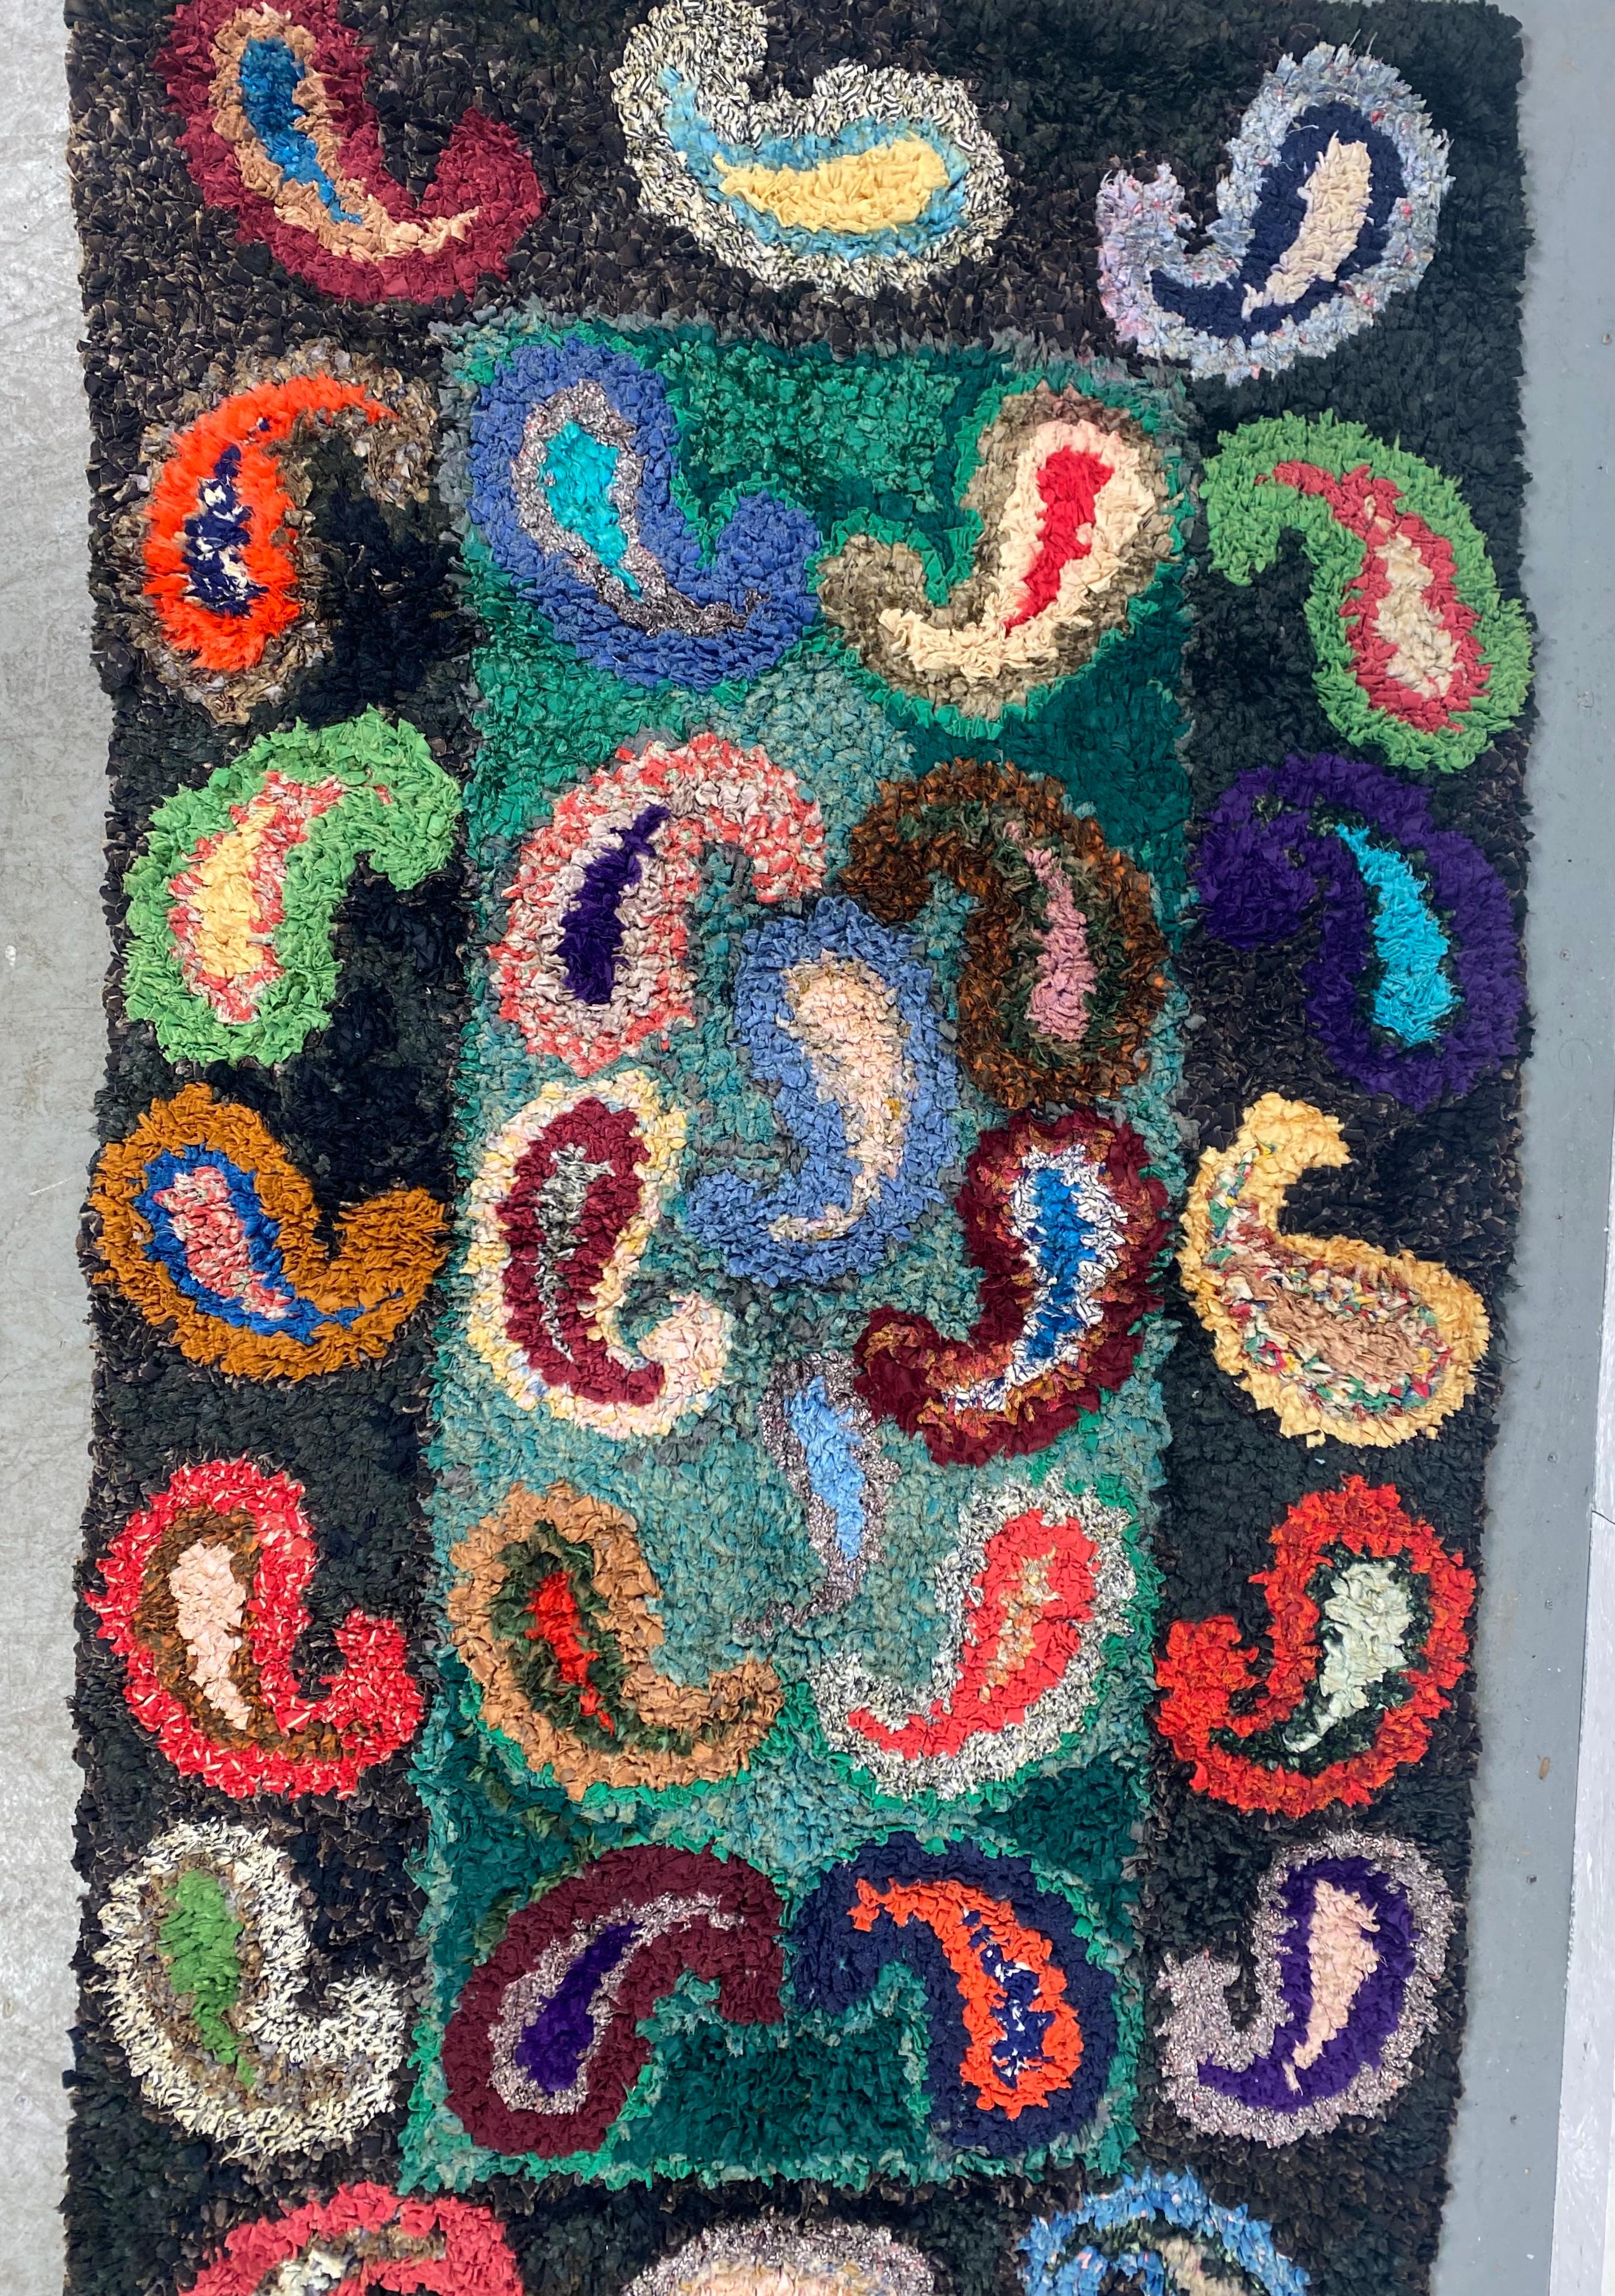 20th Century American Folk Art Hook Rug, Wall Hanging, Multi-Color Paisley Design For Sale